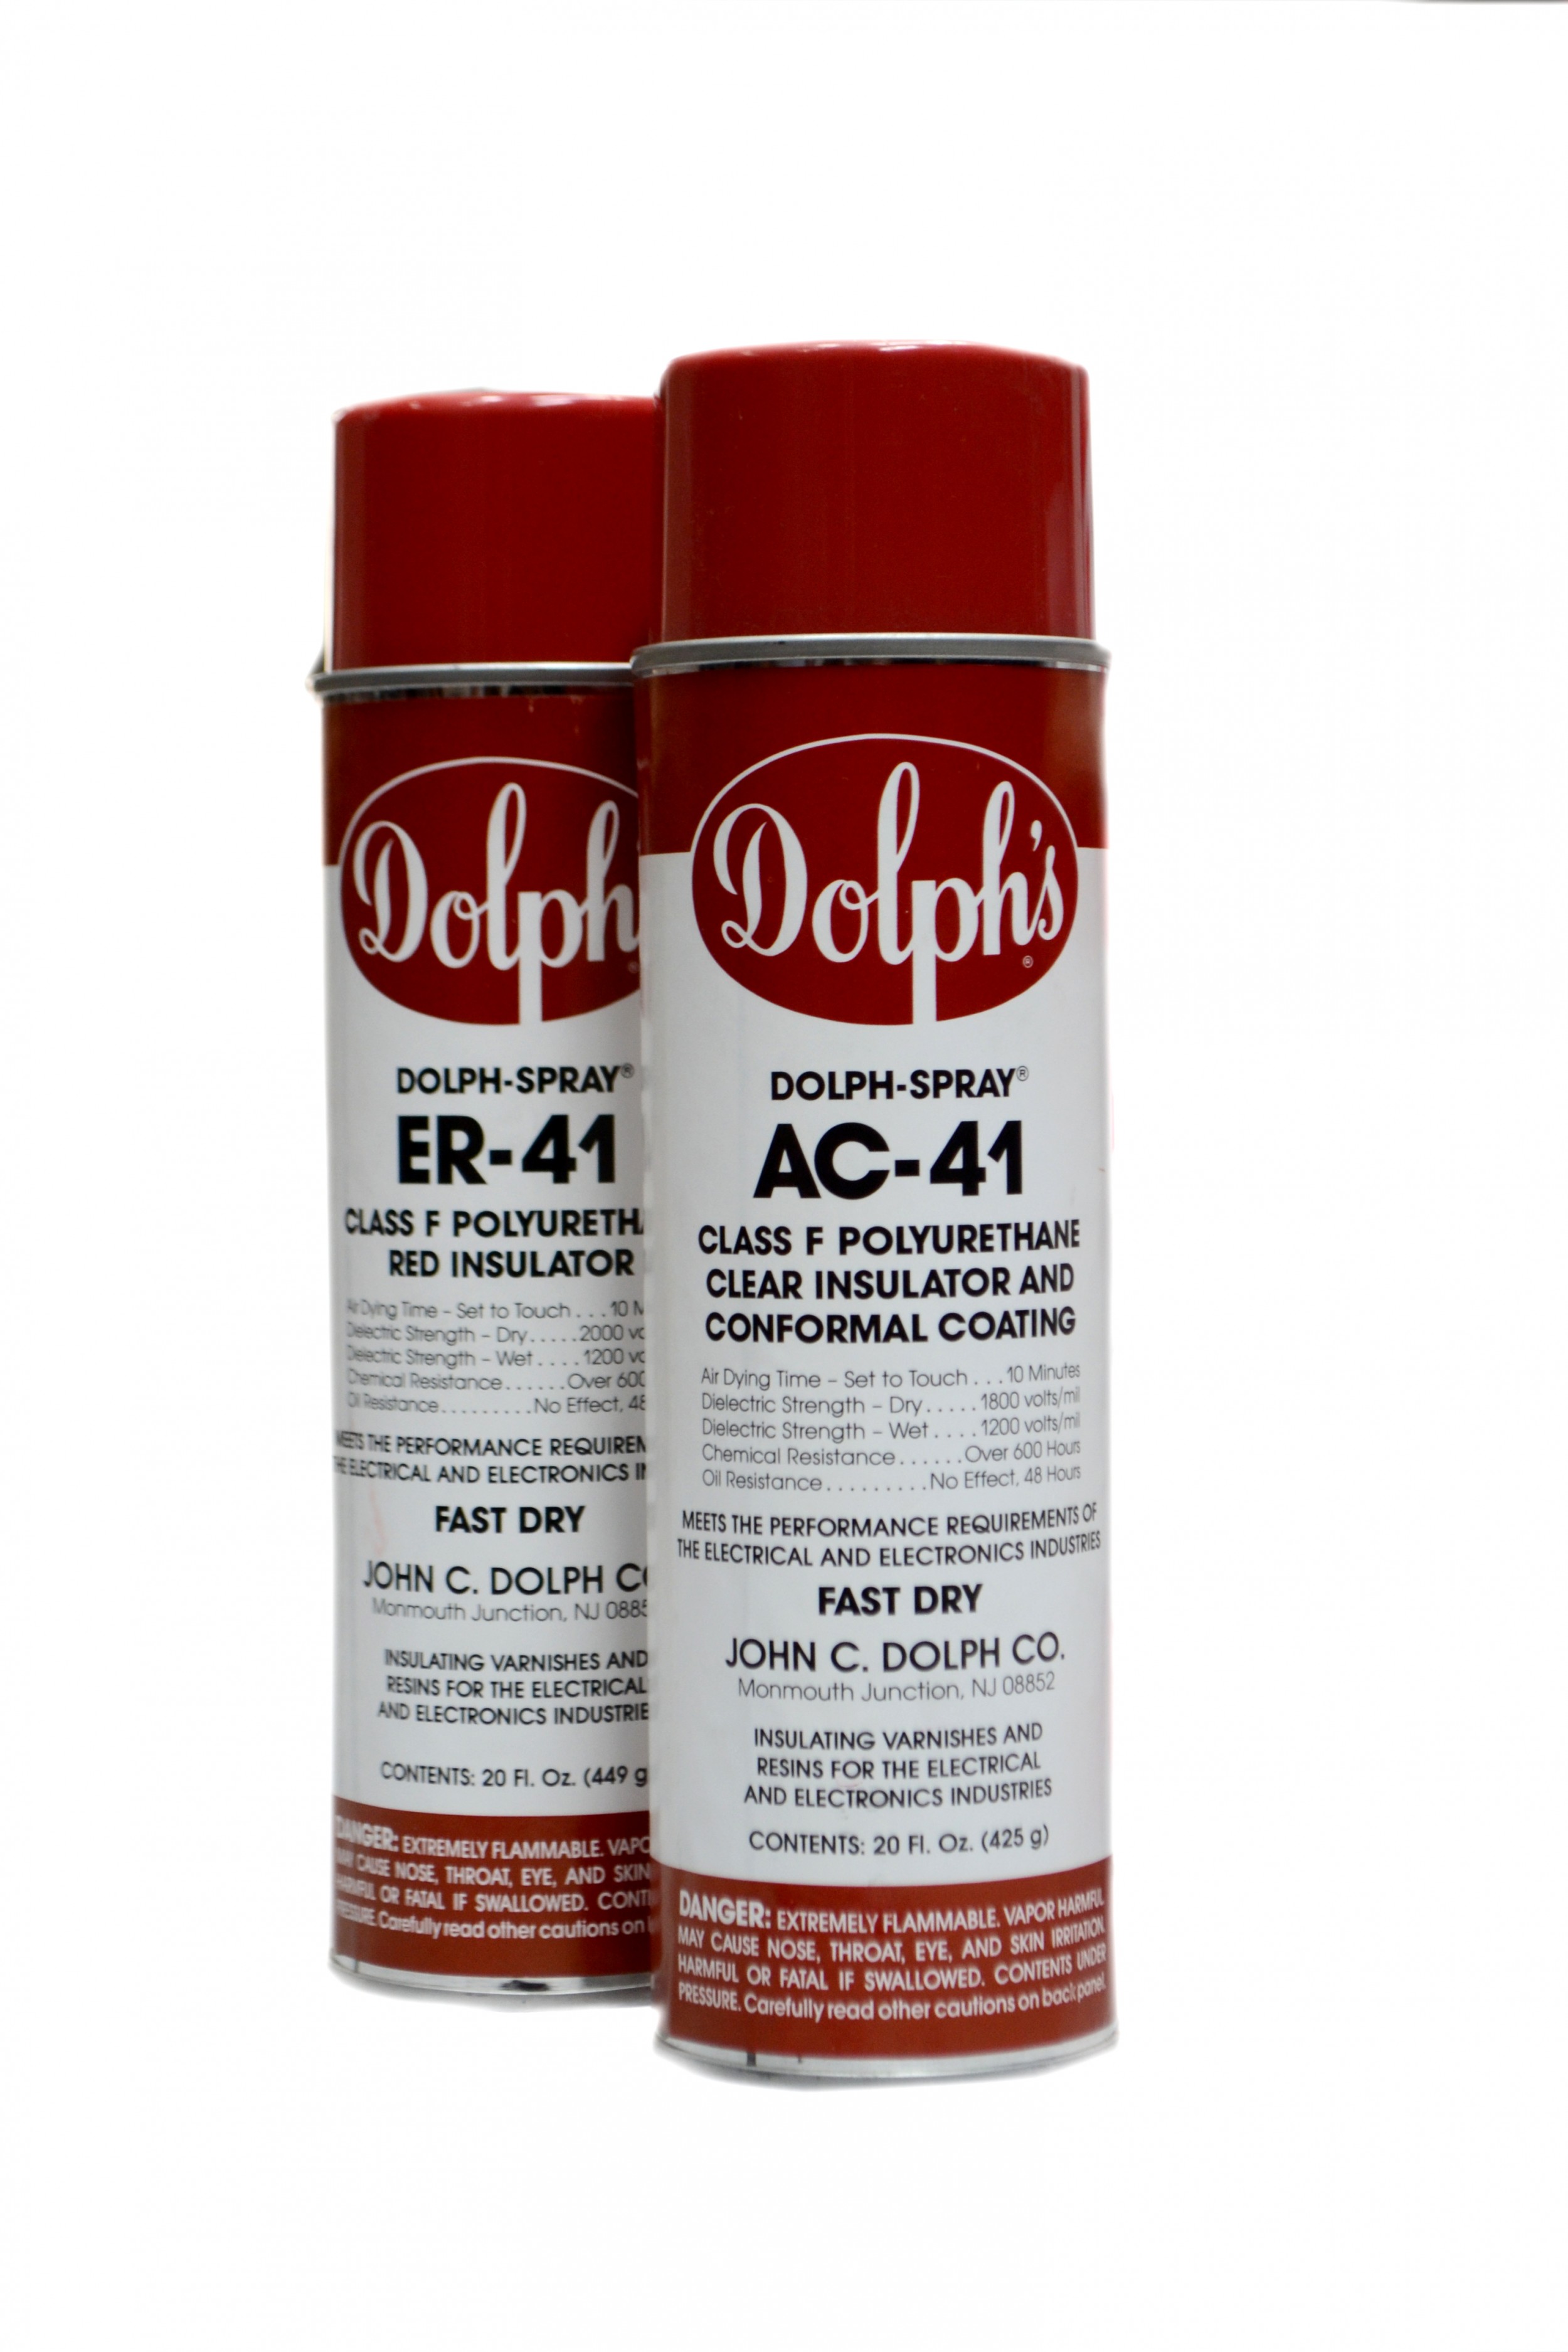 DOLPH-SPRAY LC-705 clear Insulating Lacquer 105°C, clear, aerosal SPRAY can (431 g)